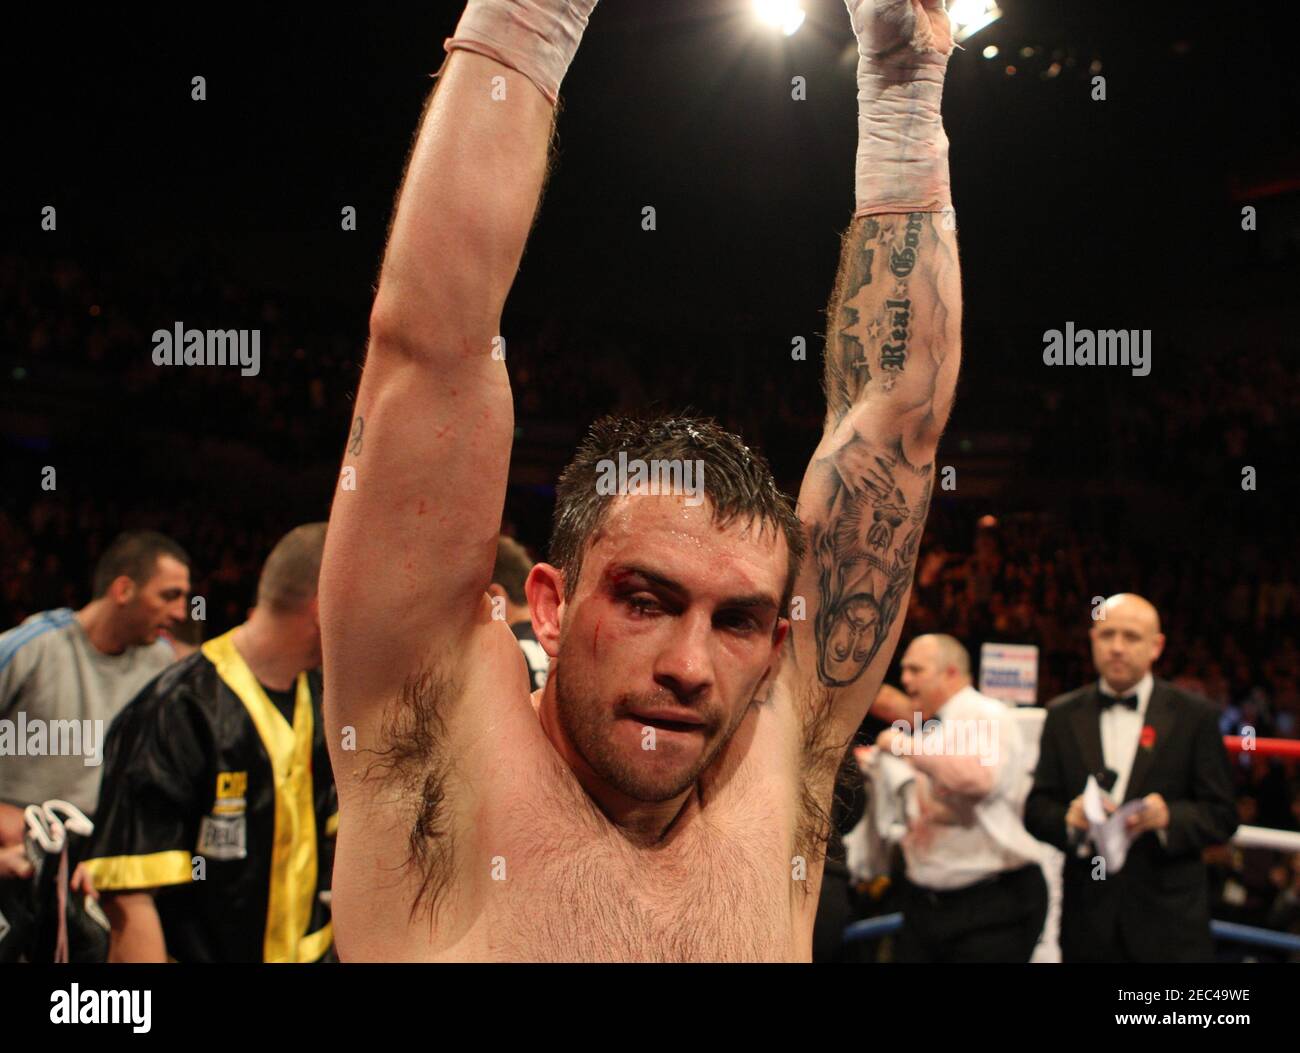 Boxing - Tony Quigley v Paul Smith - BBBofC British Super Middleweight  Title - Liverpool Echo Arena - 30/10/09 Paul Smith celebrates victory  Mandatory Credit: Action Images / Carl Recine Stock Photo - Alamy